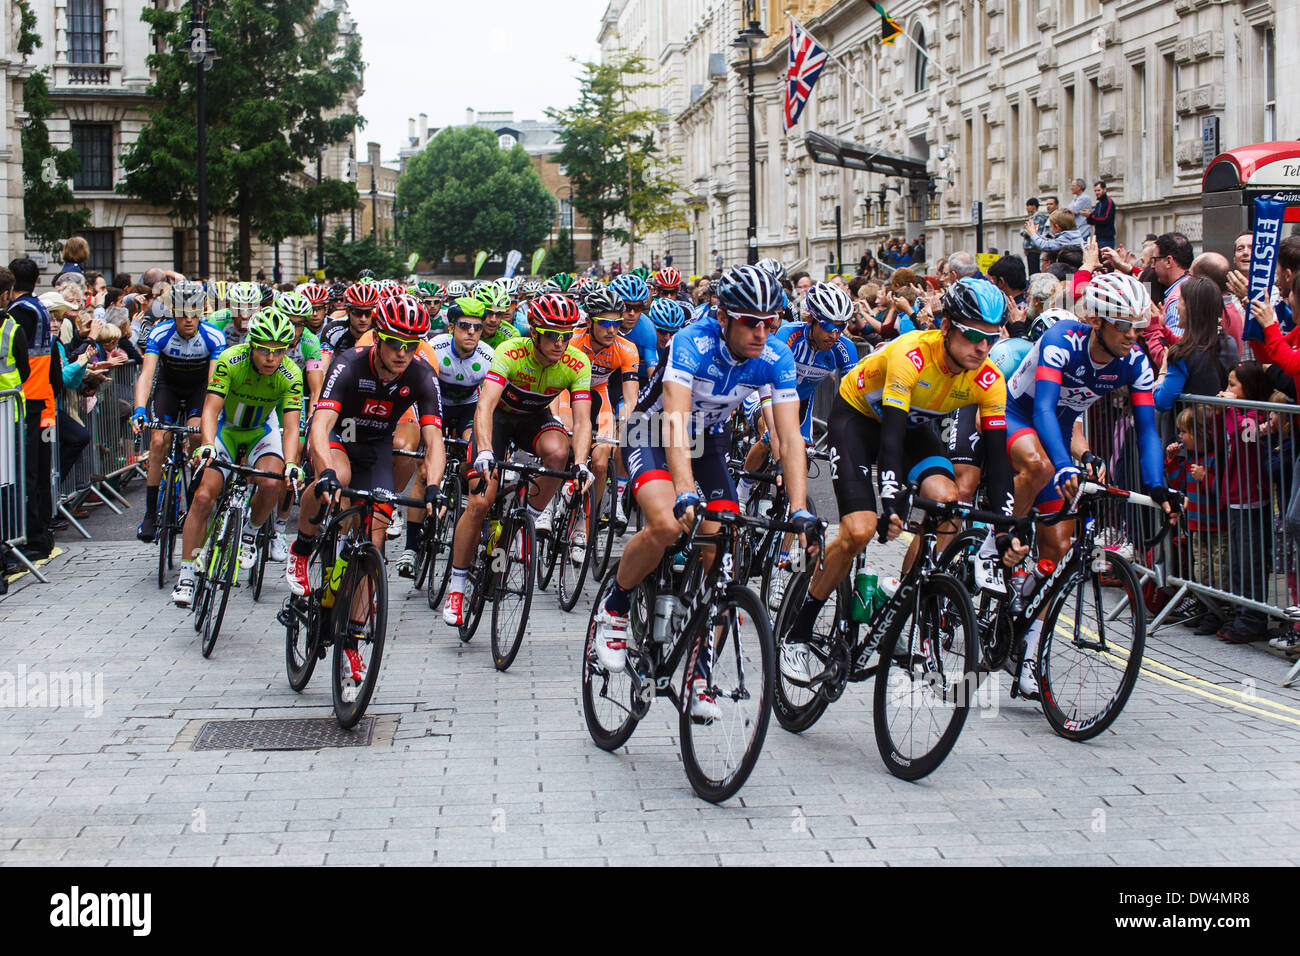 Sir Bradley Wiggins leads the peloton in the final stage of the 2013 Tour of Britain professional cycling road race in London UK Stock Photo